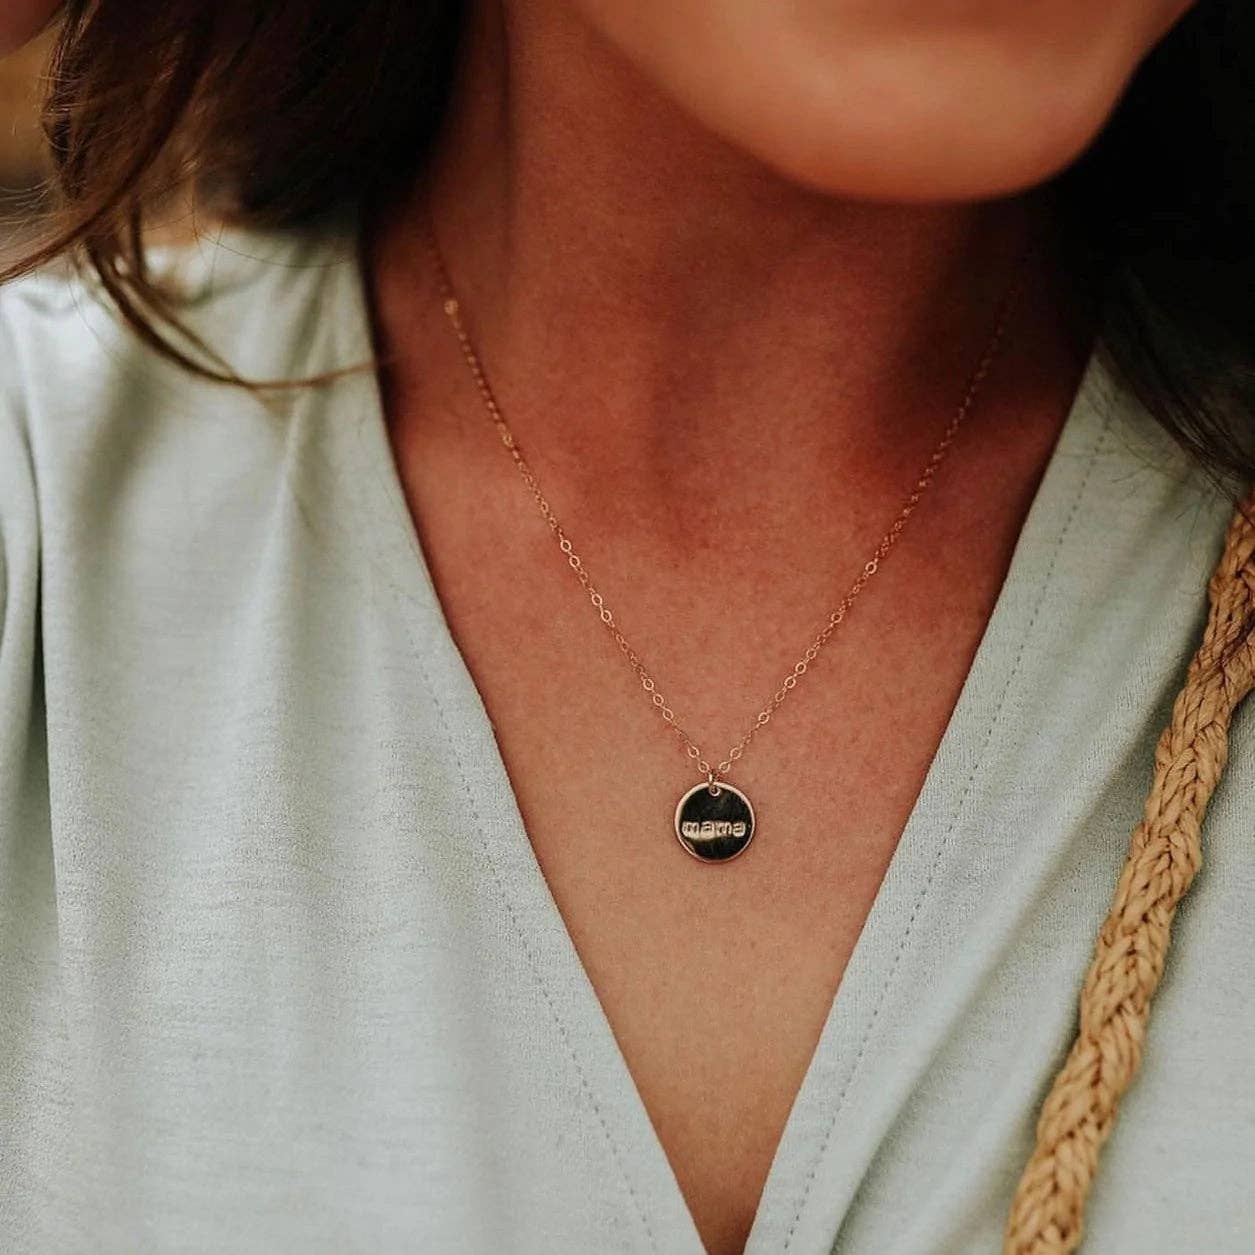 Mama Disc Necklace - Hand Stamped, Hypoallergenic, Layering